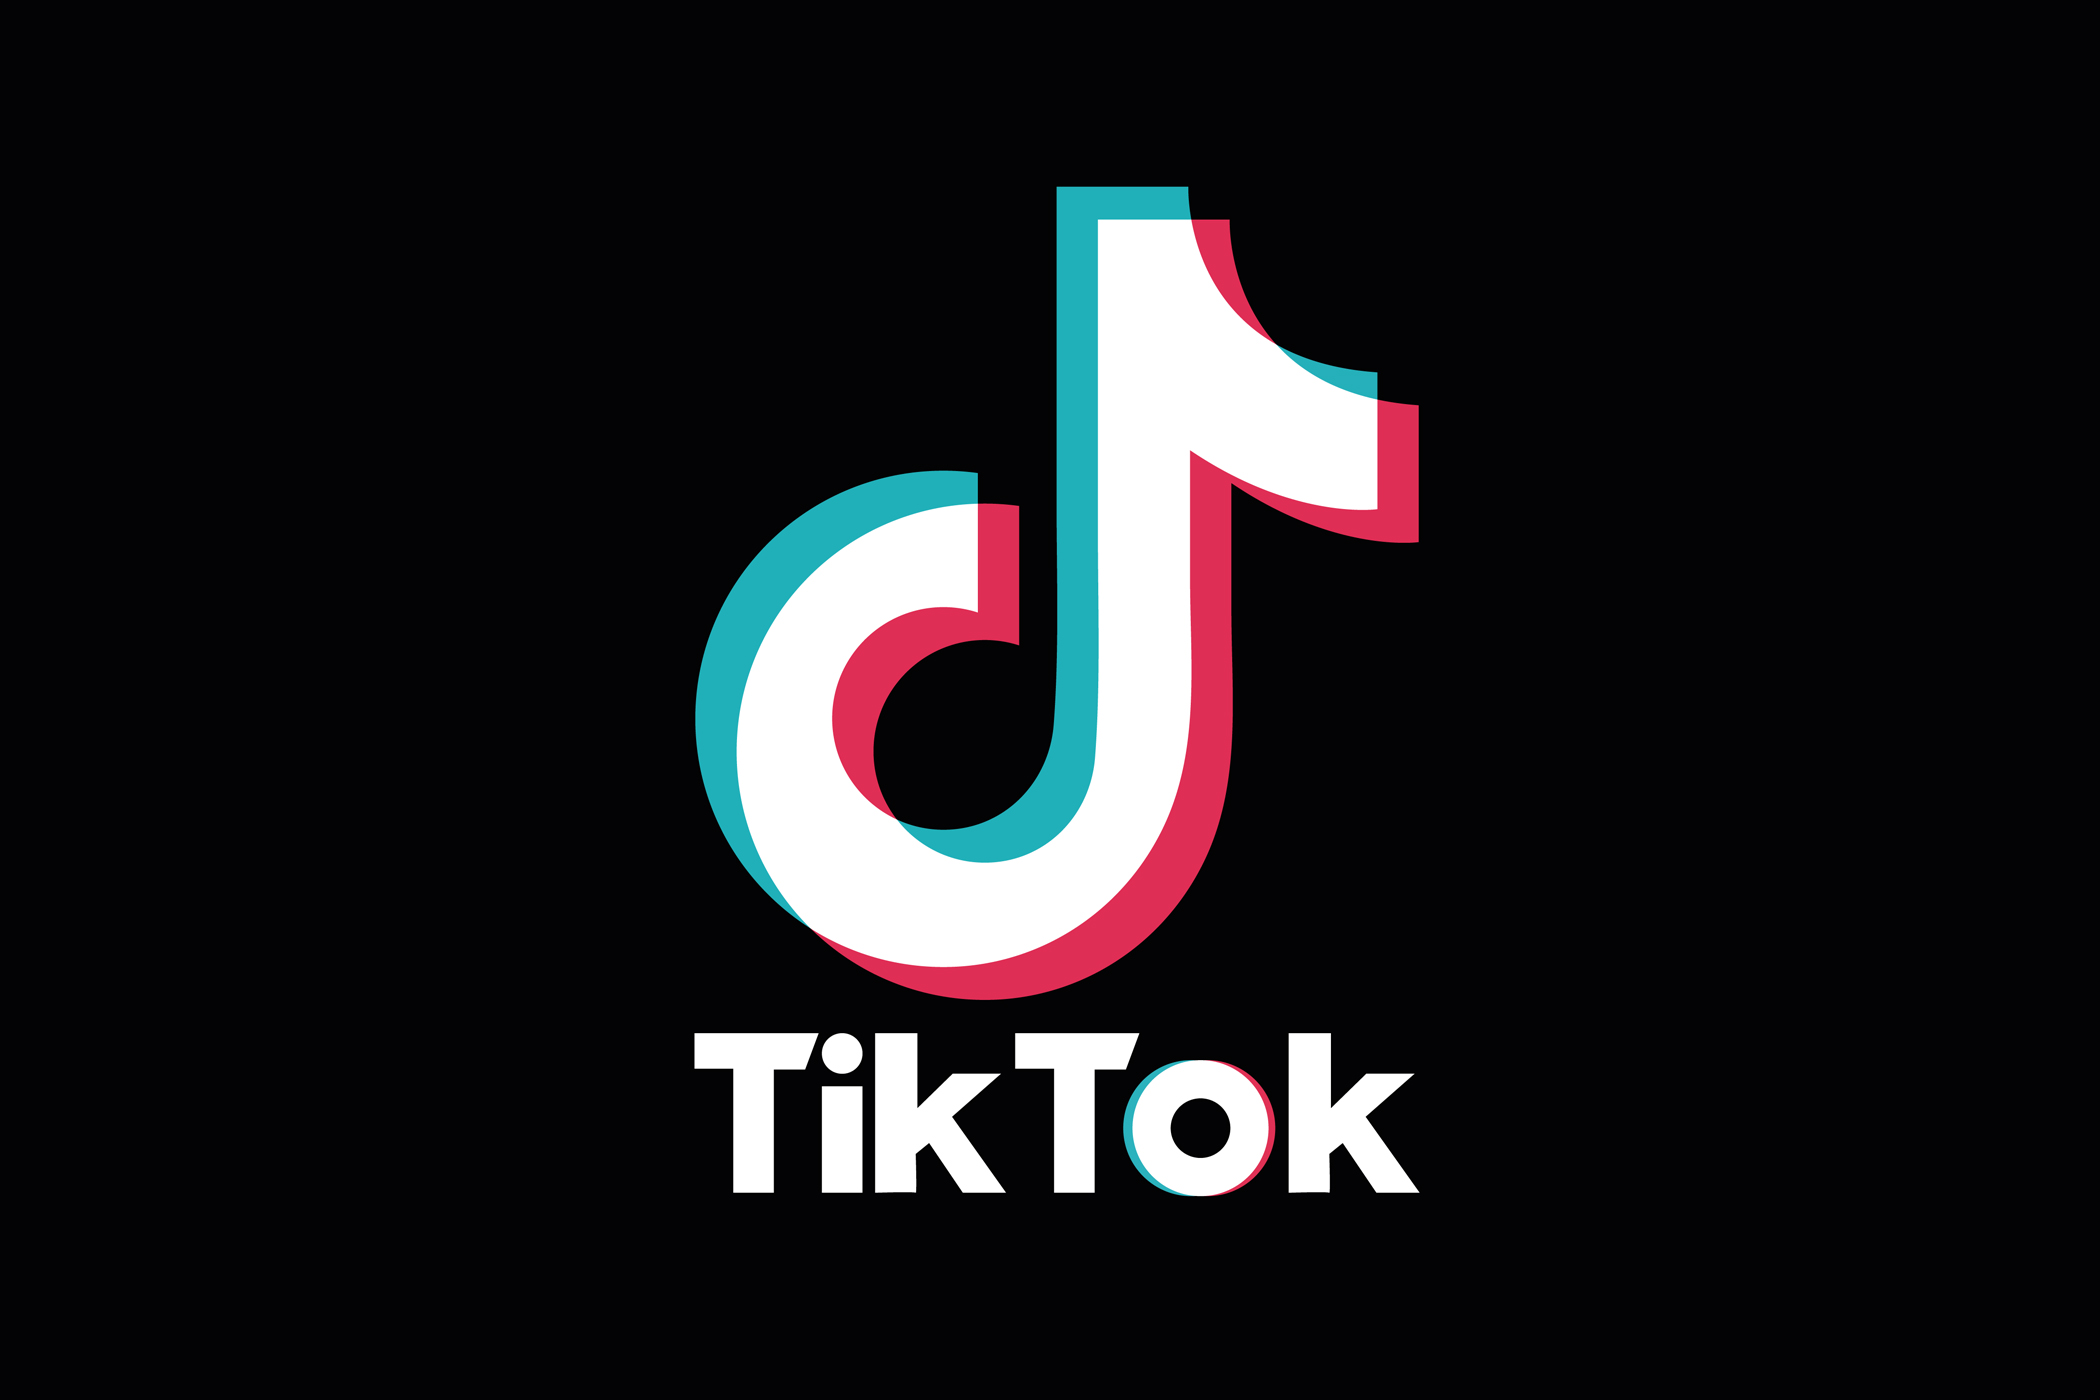 What Does “Pinned” Mean on TikTok?